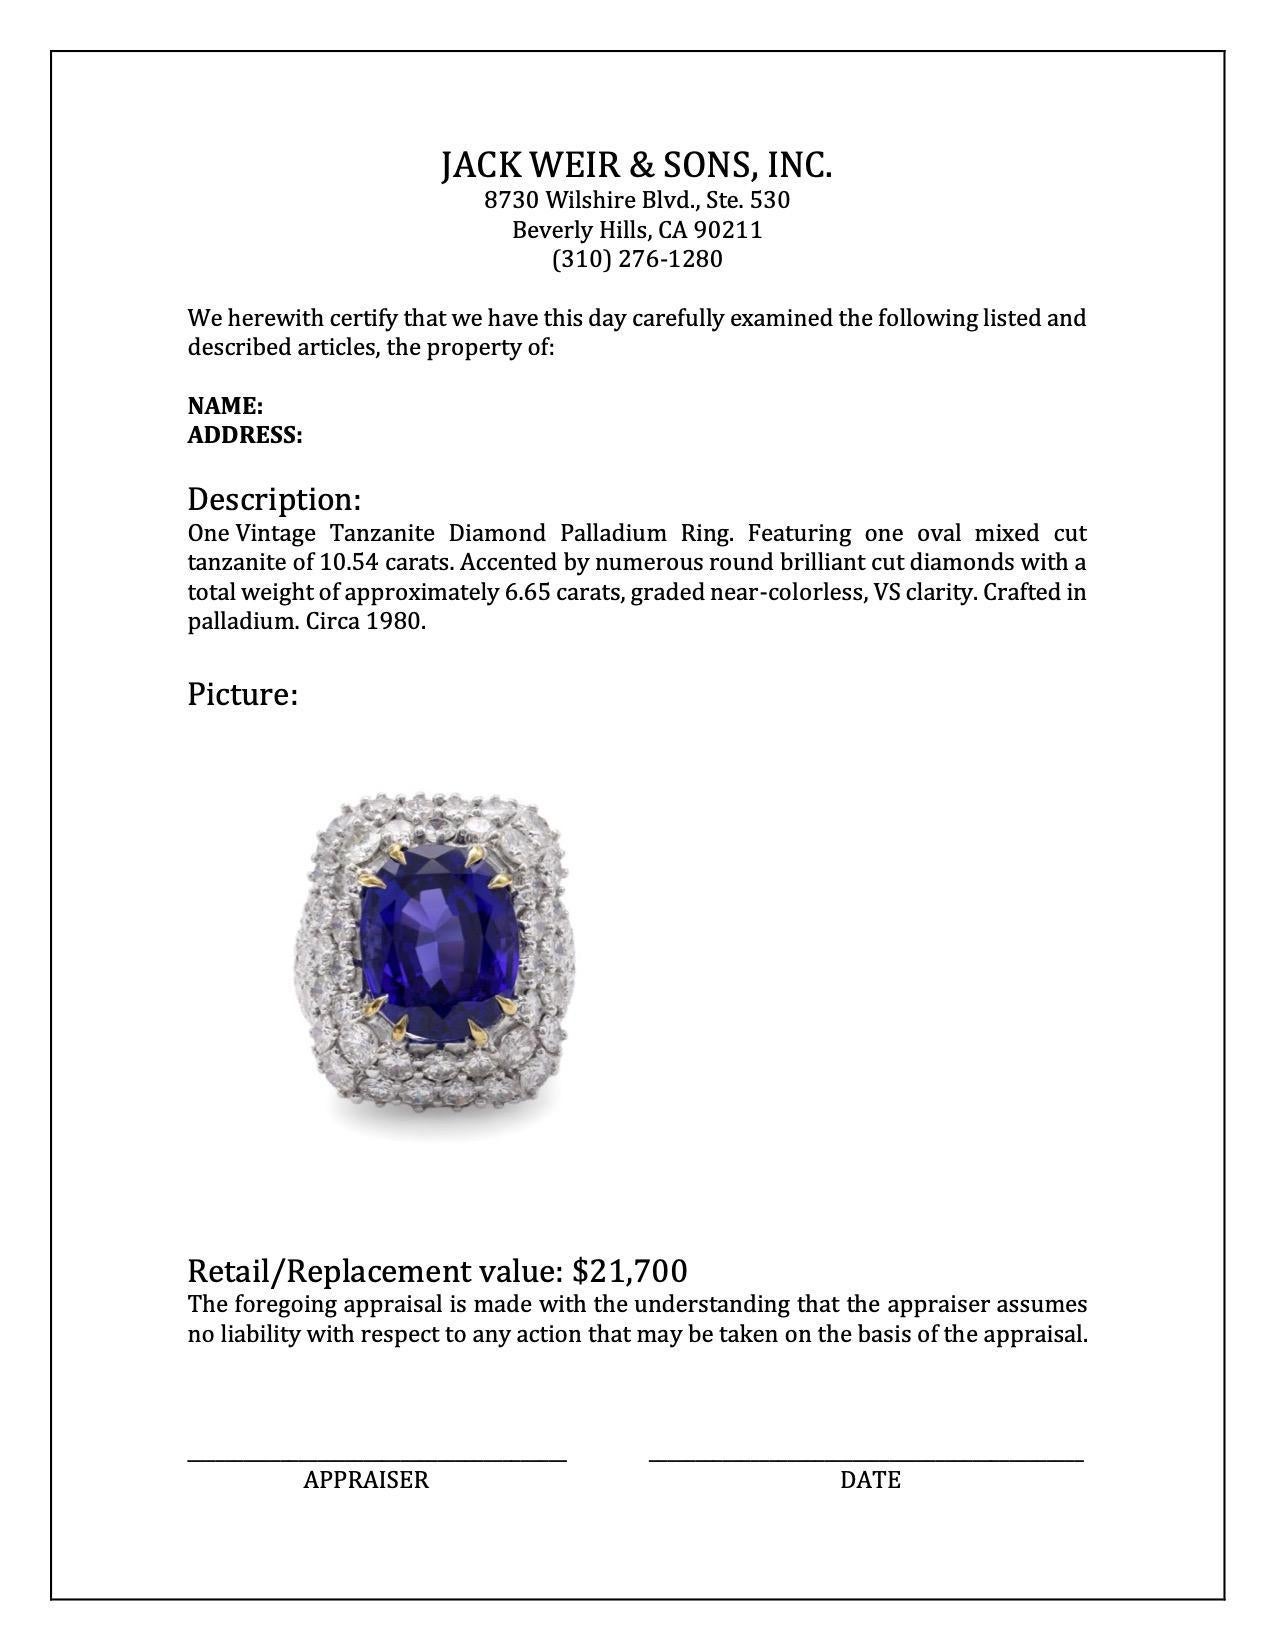 One Vintage Tanzanite Diamond Palladium Ring In Excellent Condition For Sale In Beverly Hills, CA